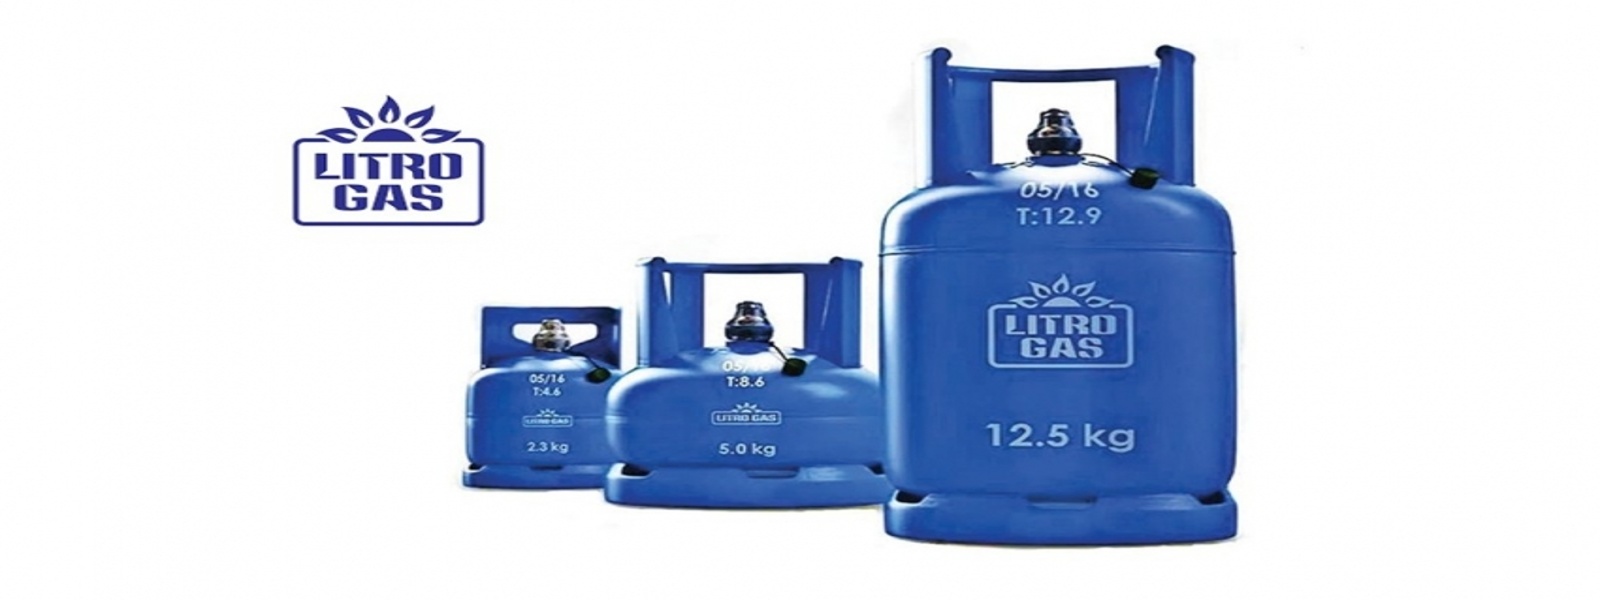 Over 100,000 LP Gas Cylinders to the market